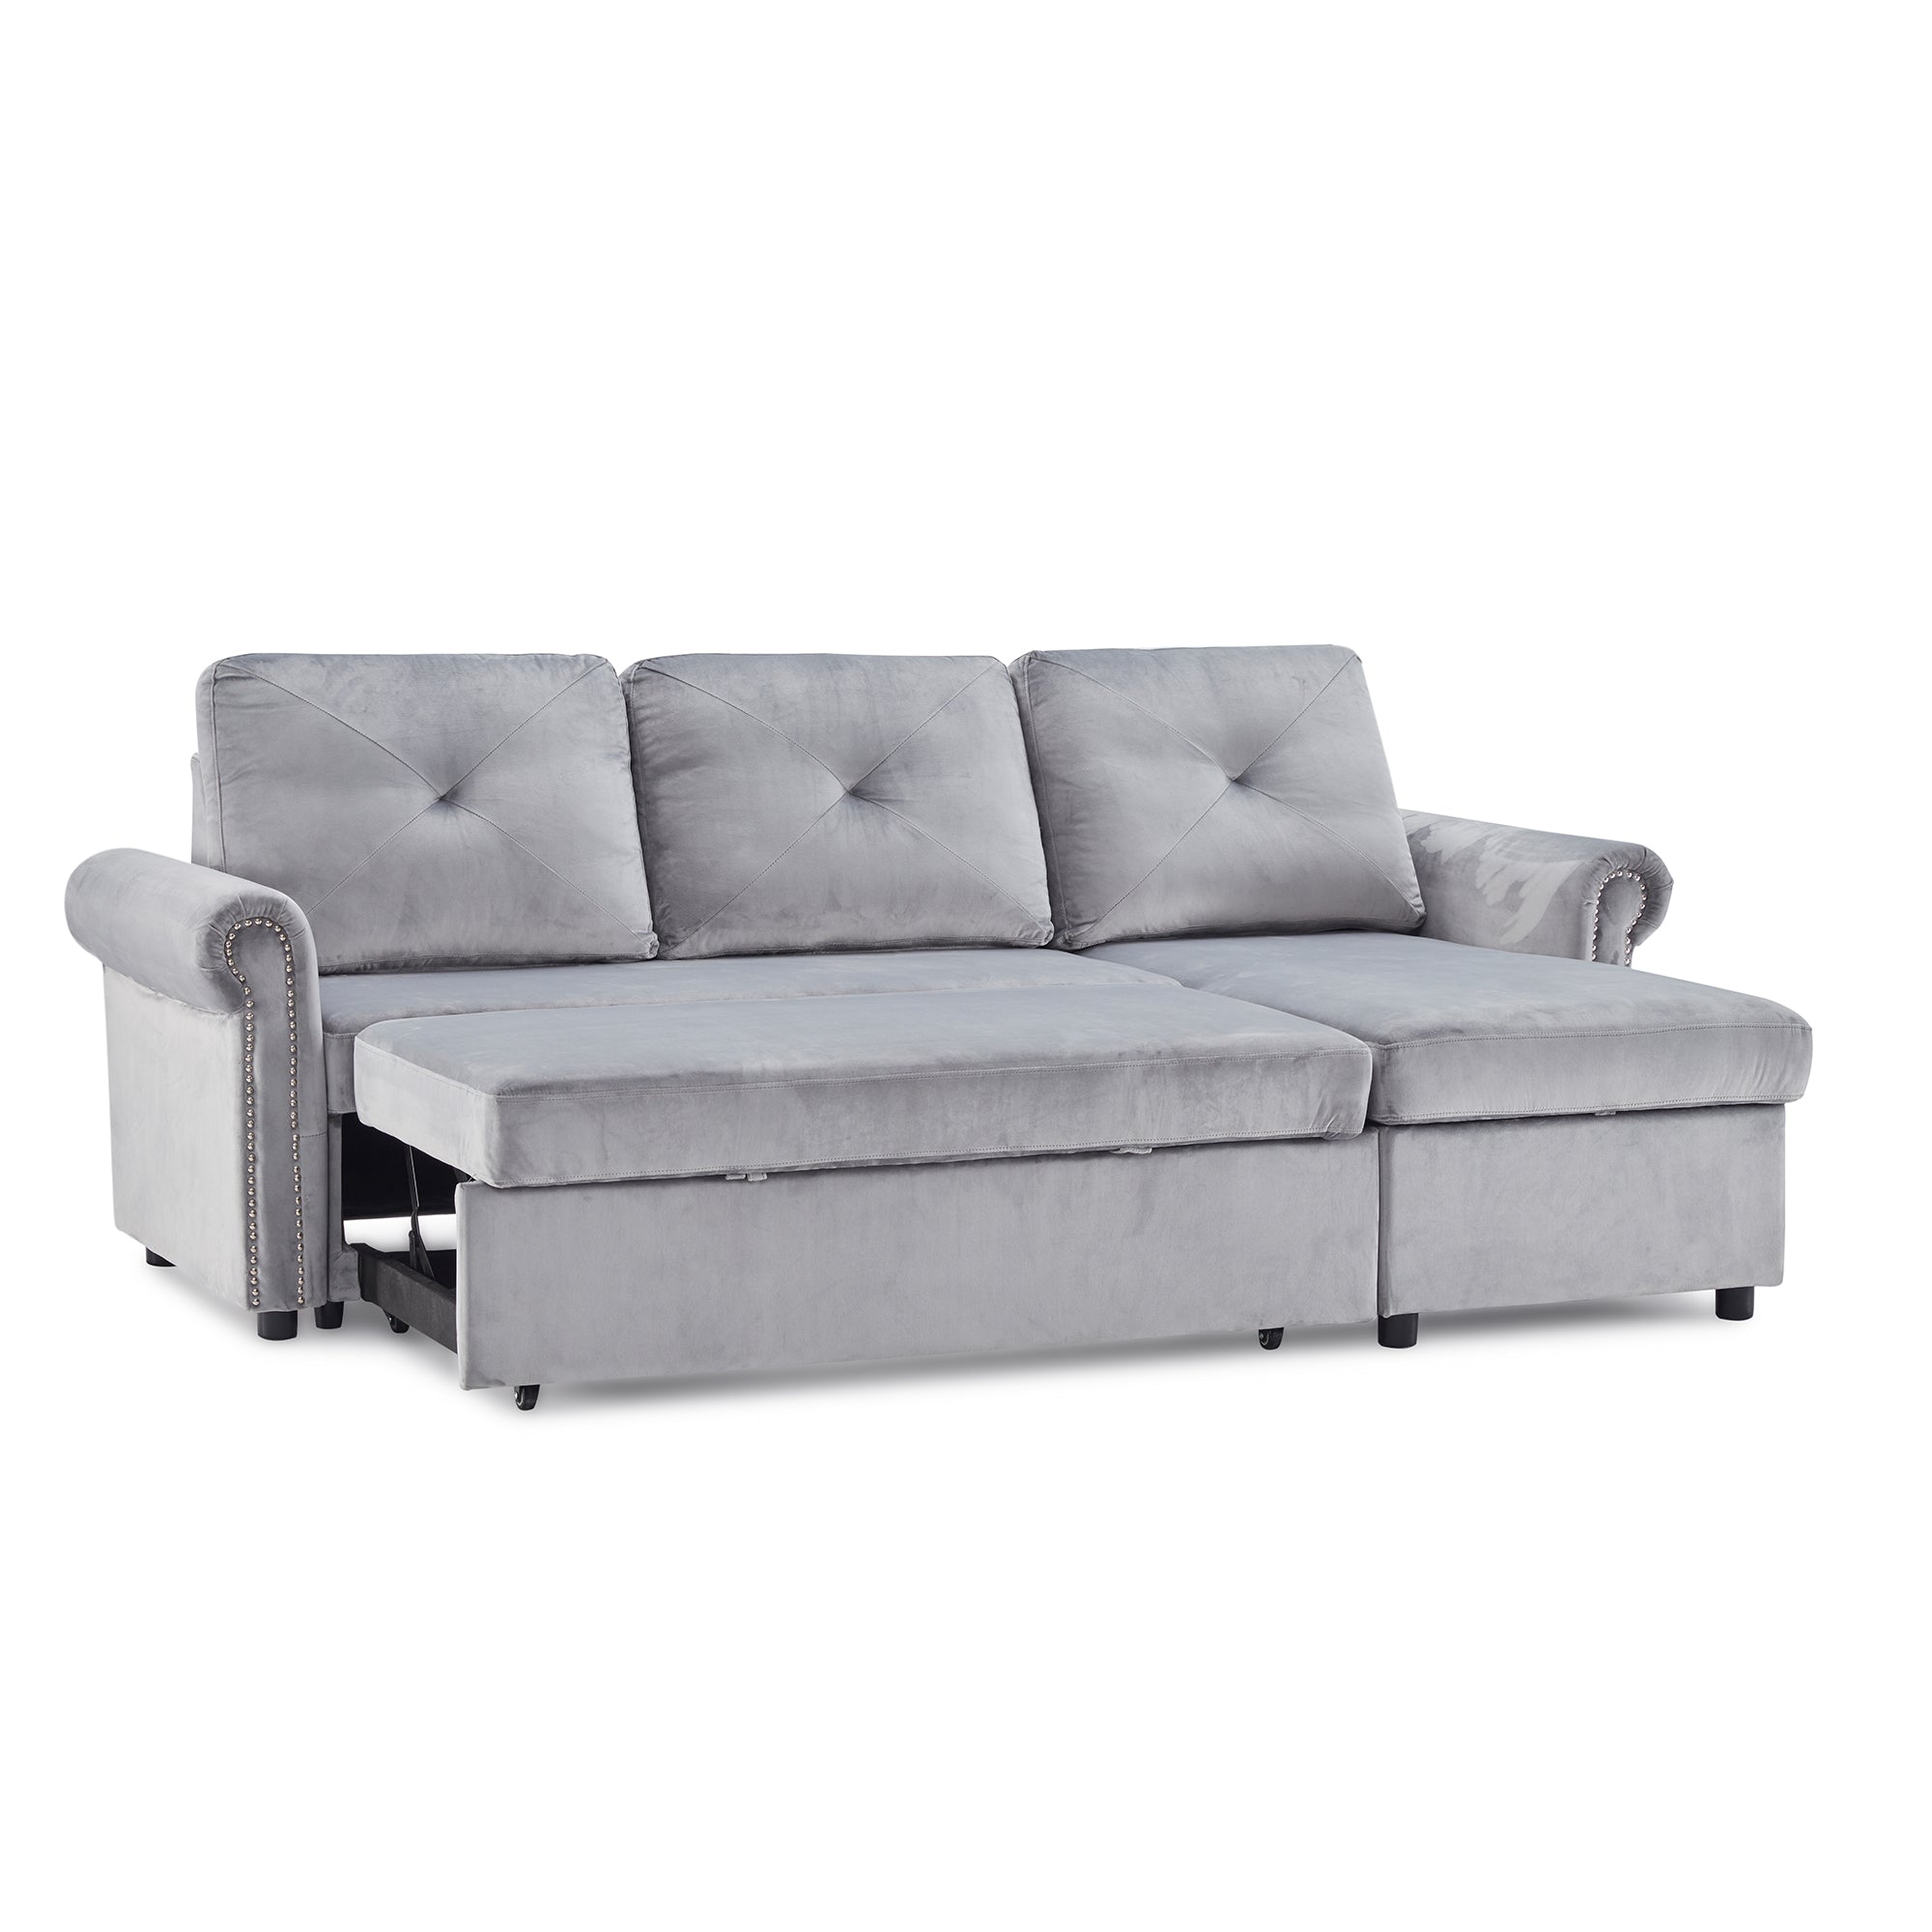 83" 3-Seater Sleeper Sofa Bed Convertible Sectional Sofa Couch with Storage-Boyel Living